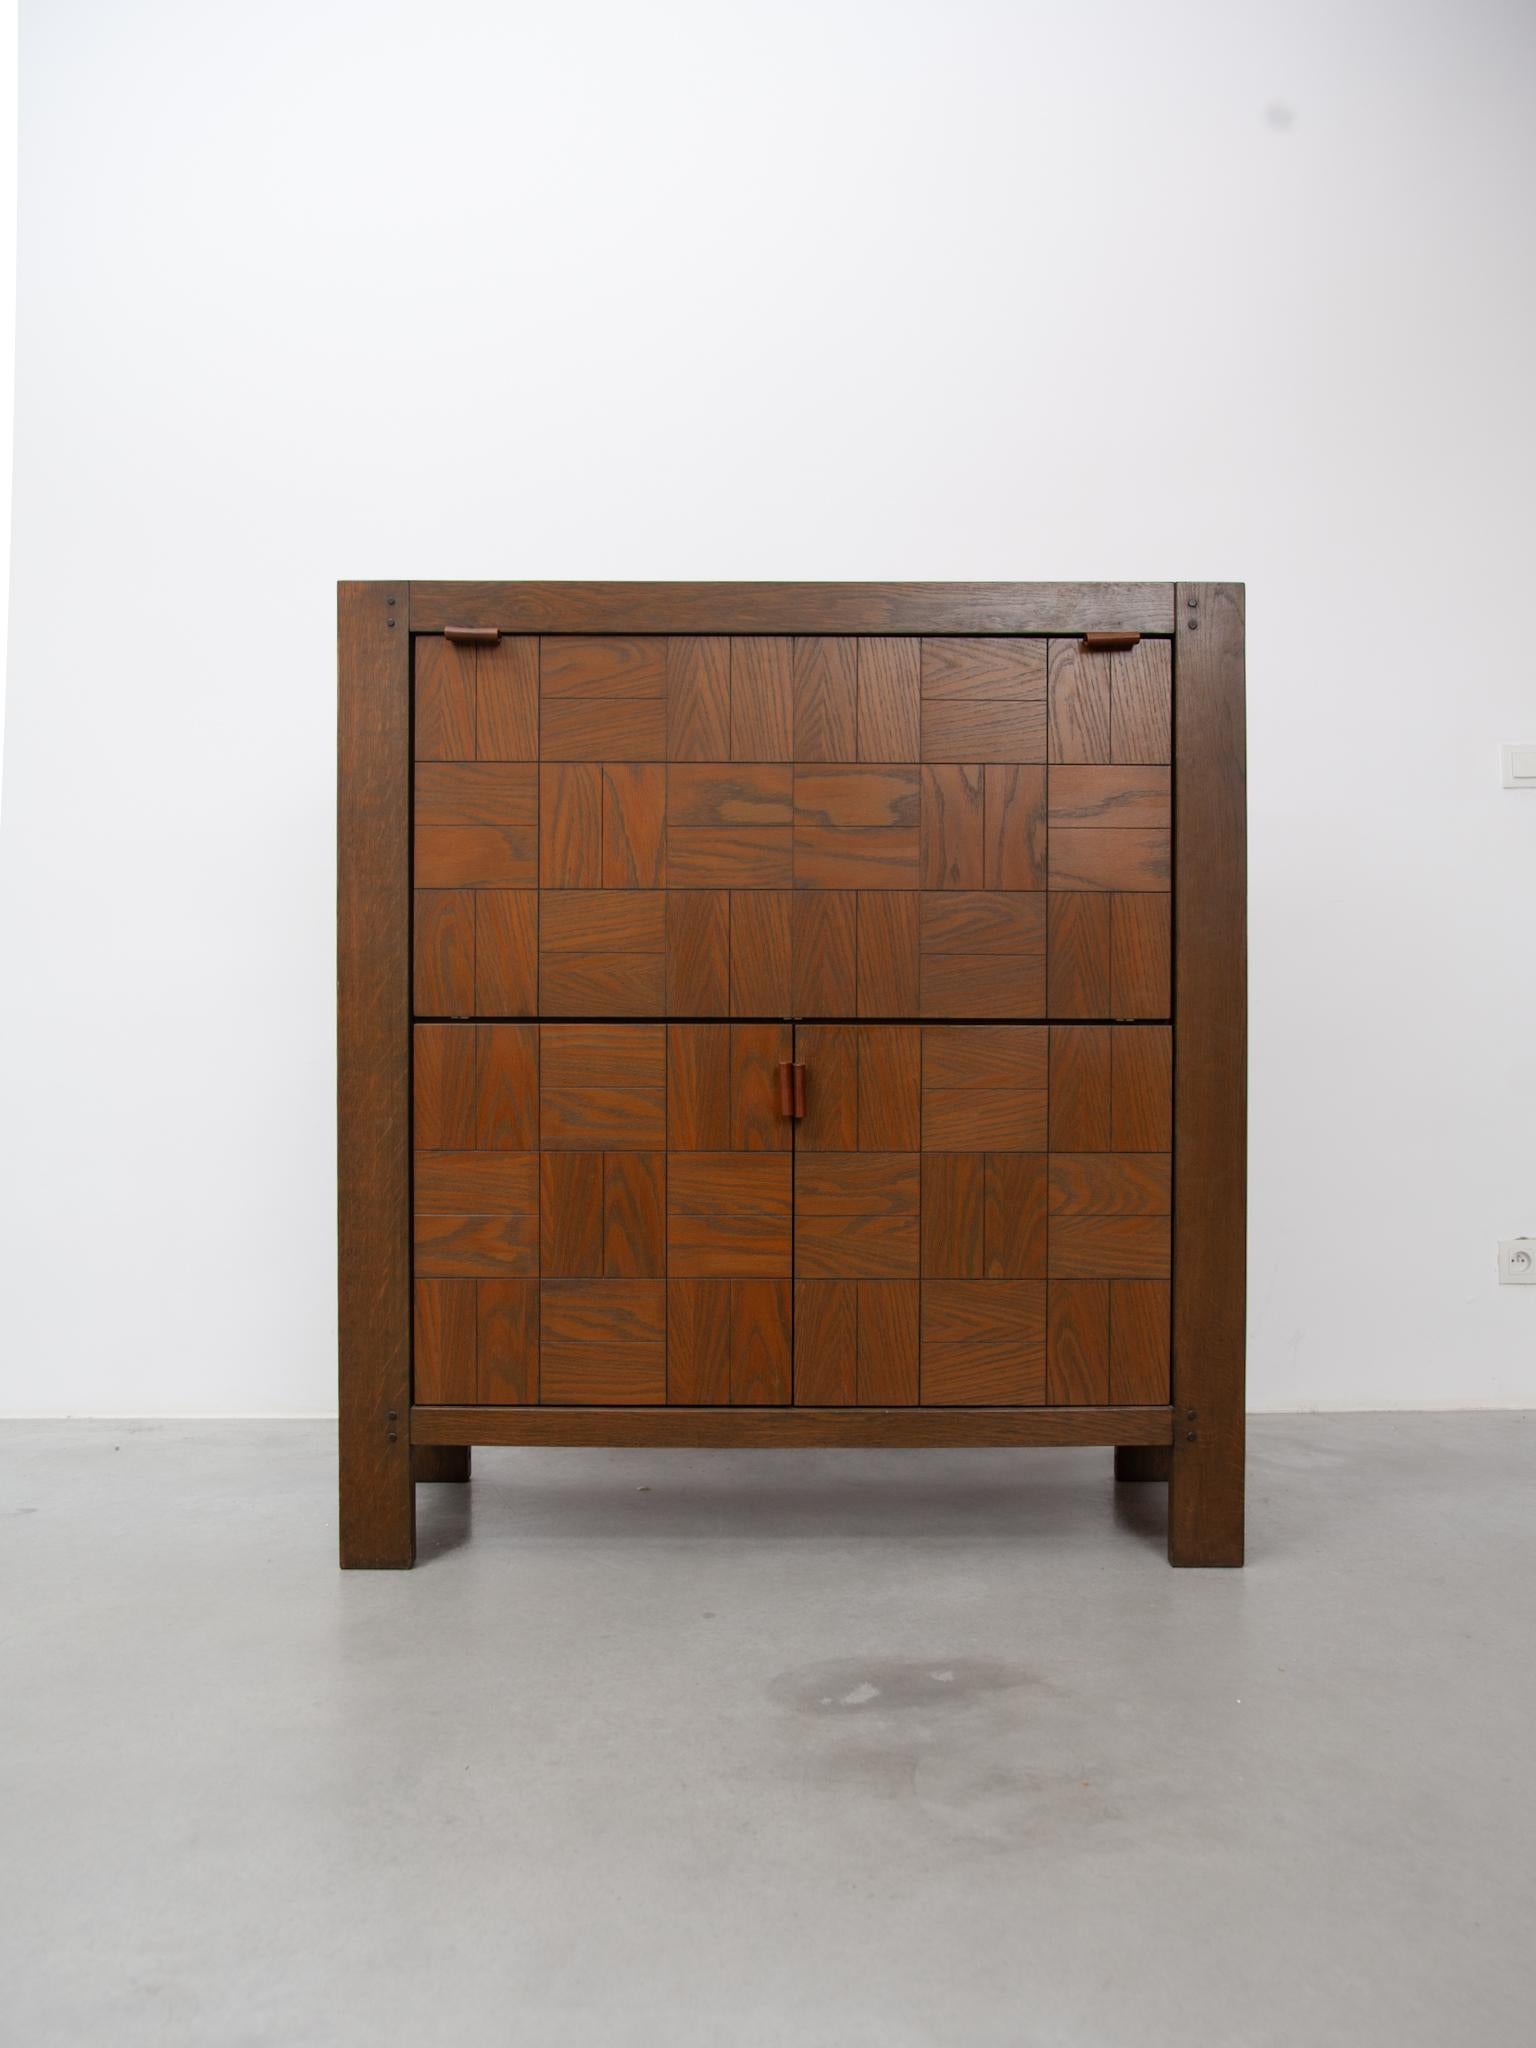 Vintage wood inlaid grained oak tiles high sideboard designed by Frans Defour for Defour, 1970s,
Belgium Design. This very rare high bar sideboard is in original good condition with a nice detail of leather grips.
 

